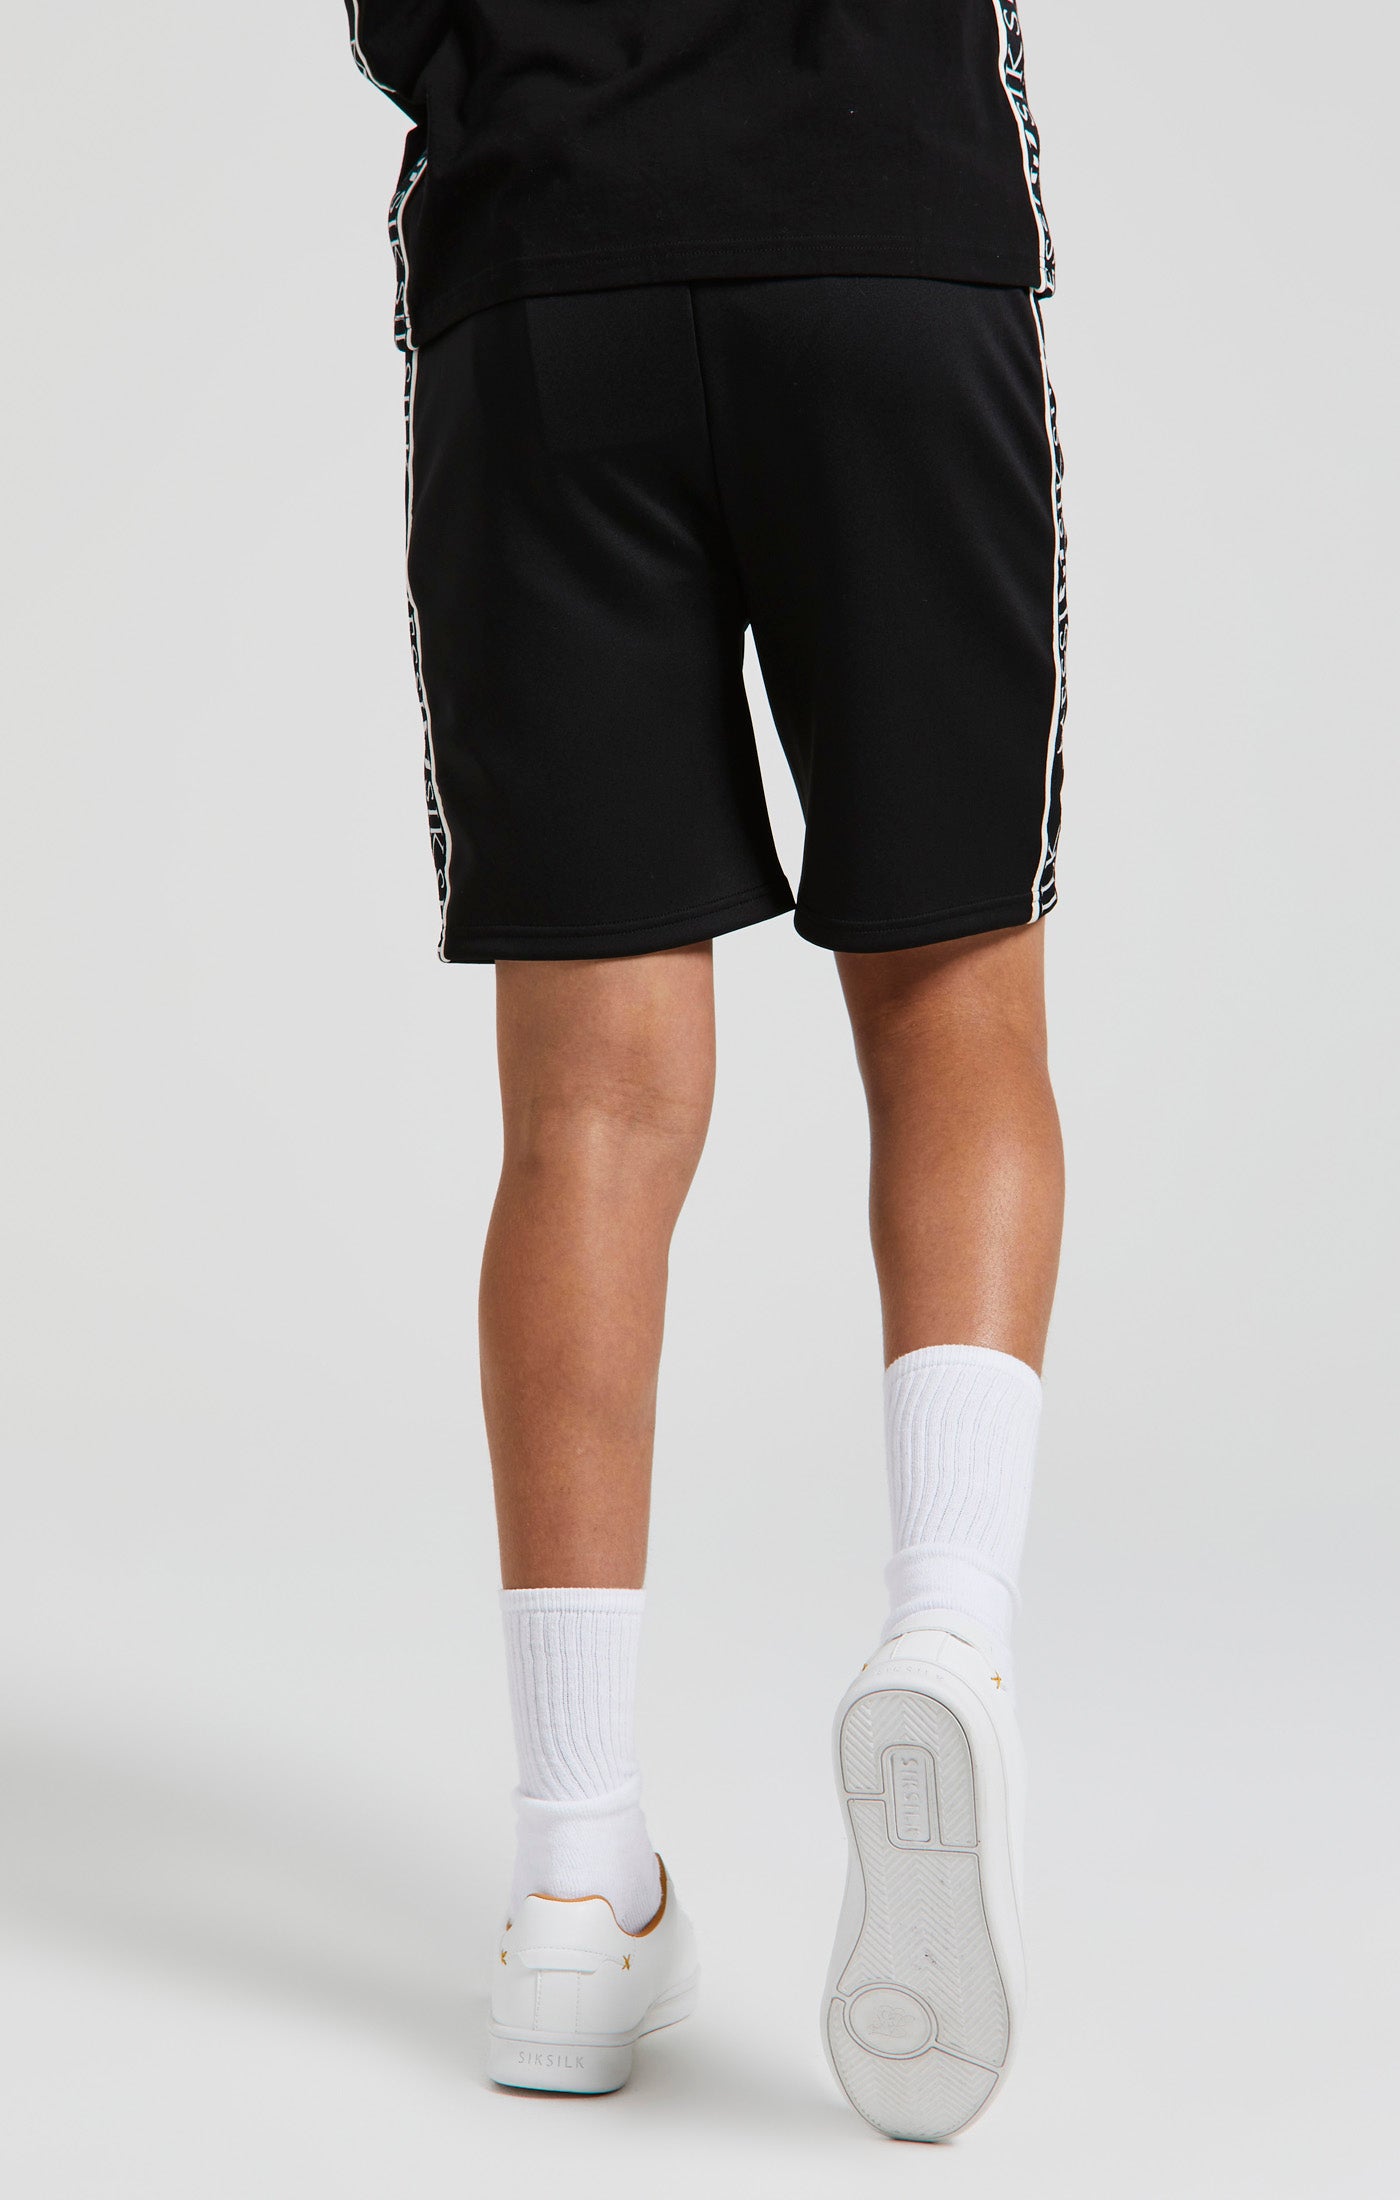 Load image into Gallery viewer, Boys Messi x SikSilk Black Taped Short (3)